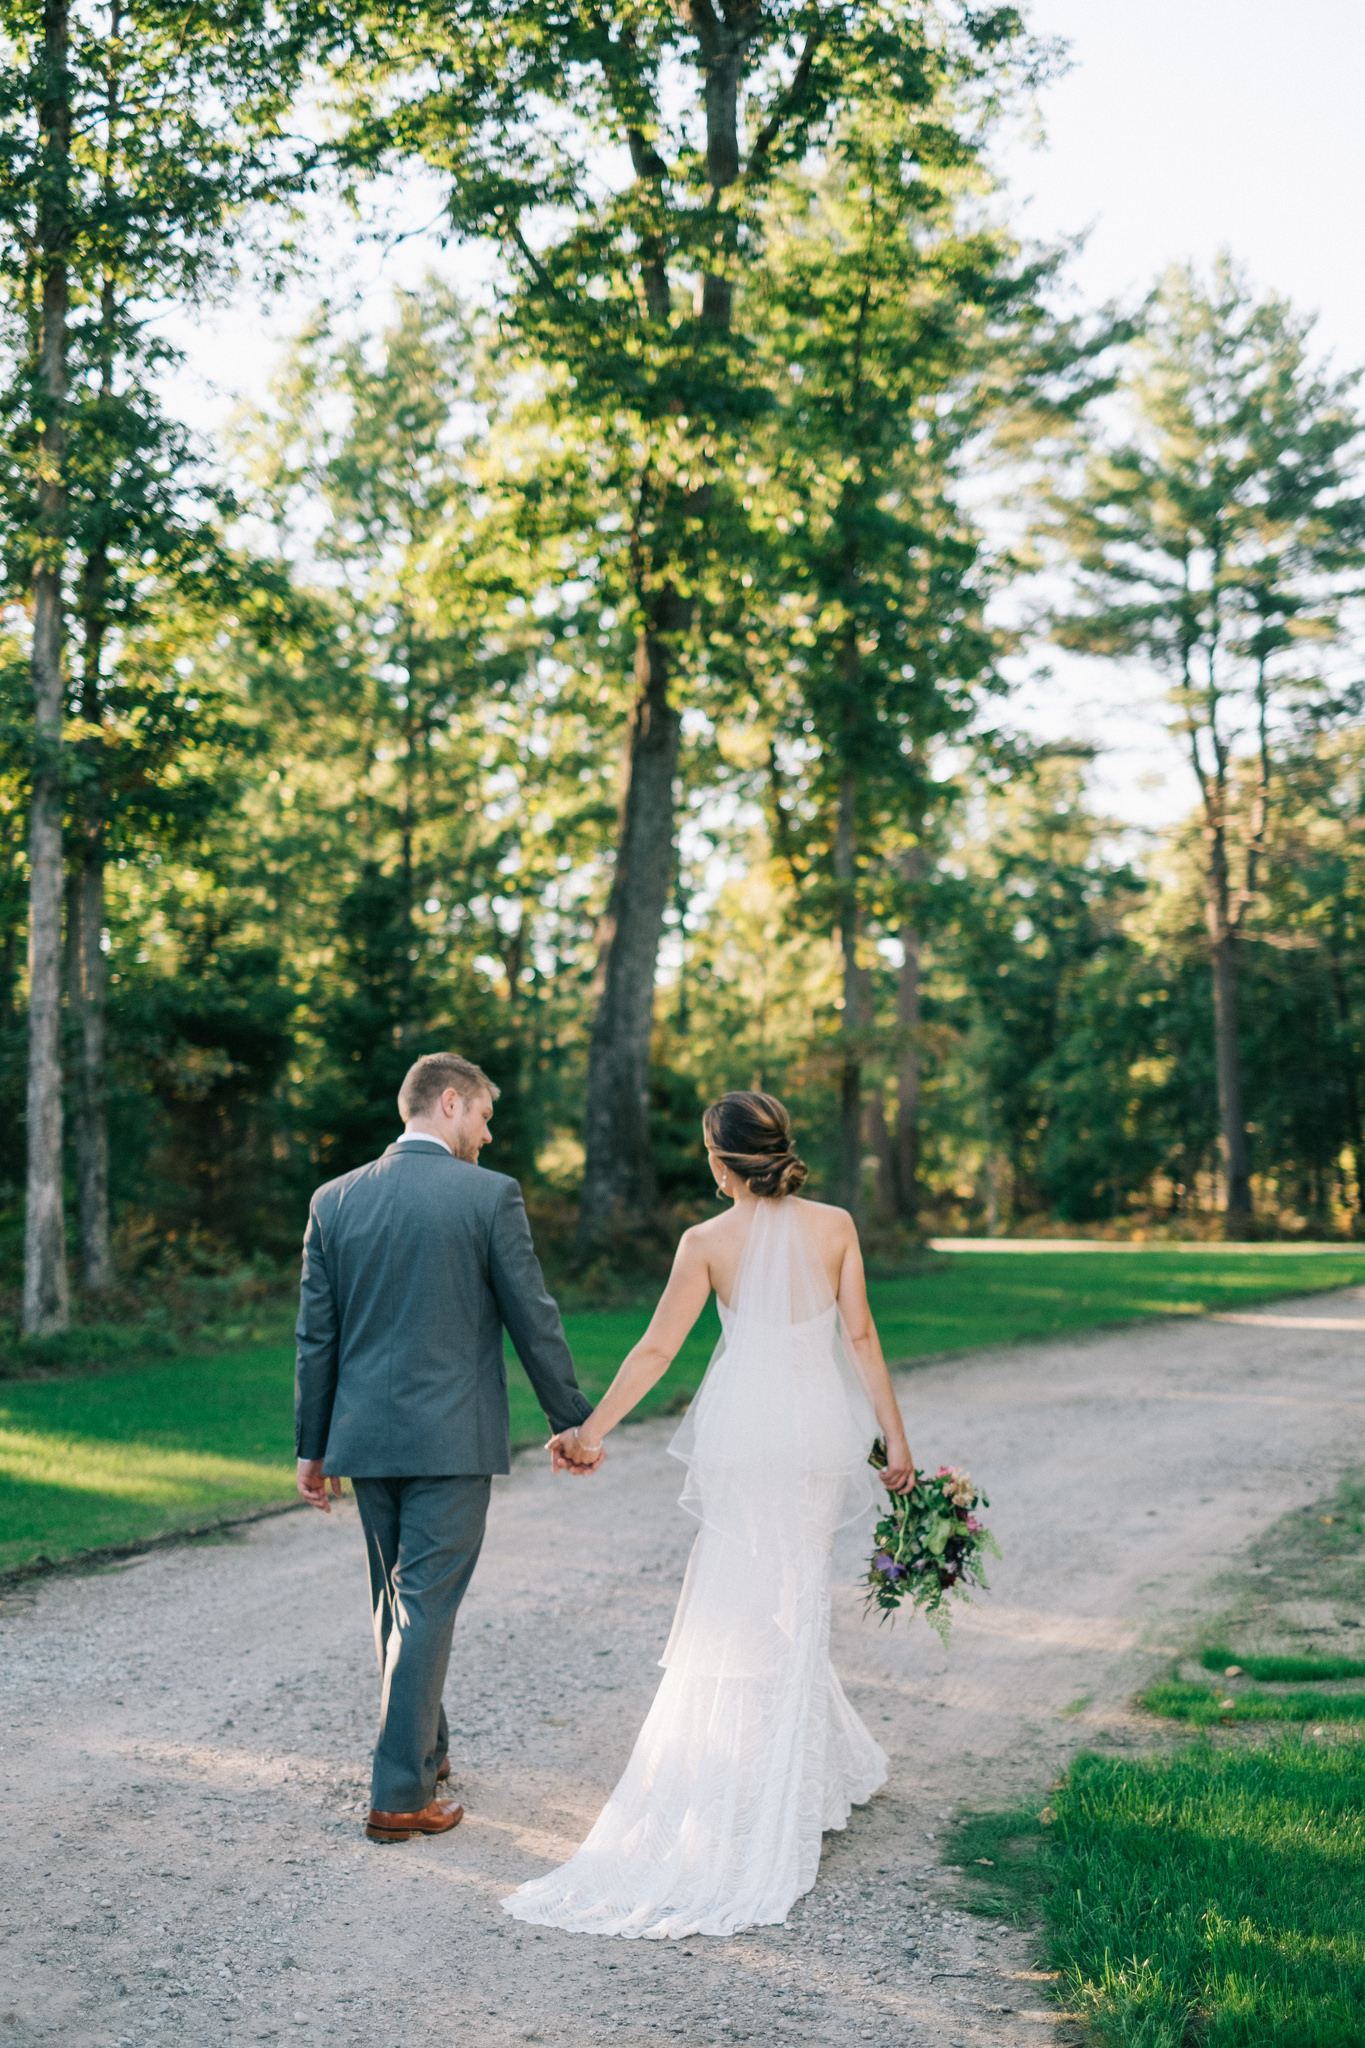 A Day In May, Event Planning & Design | Northern Michigan Weddings ...